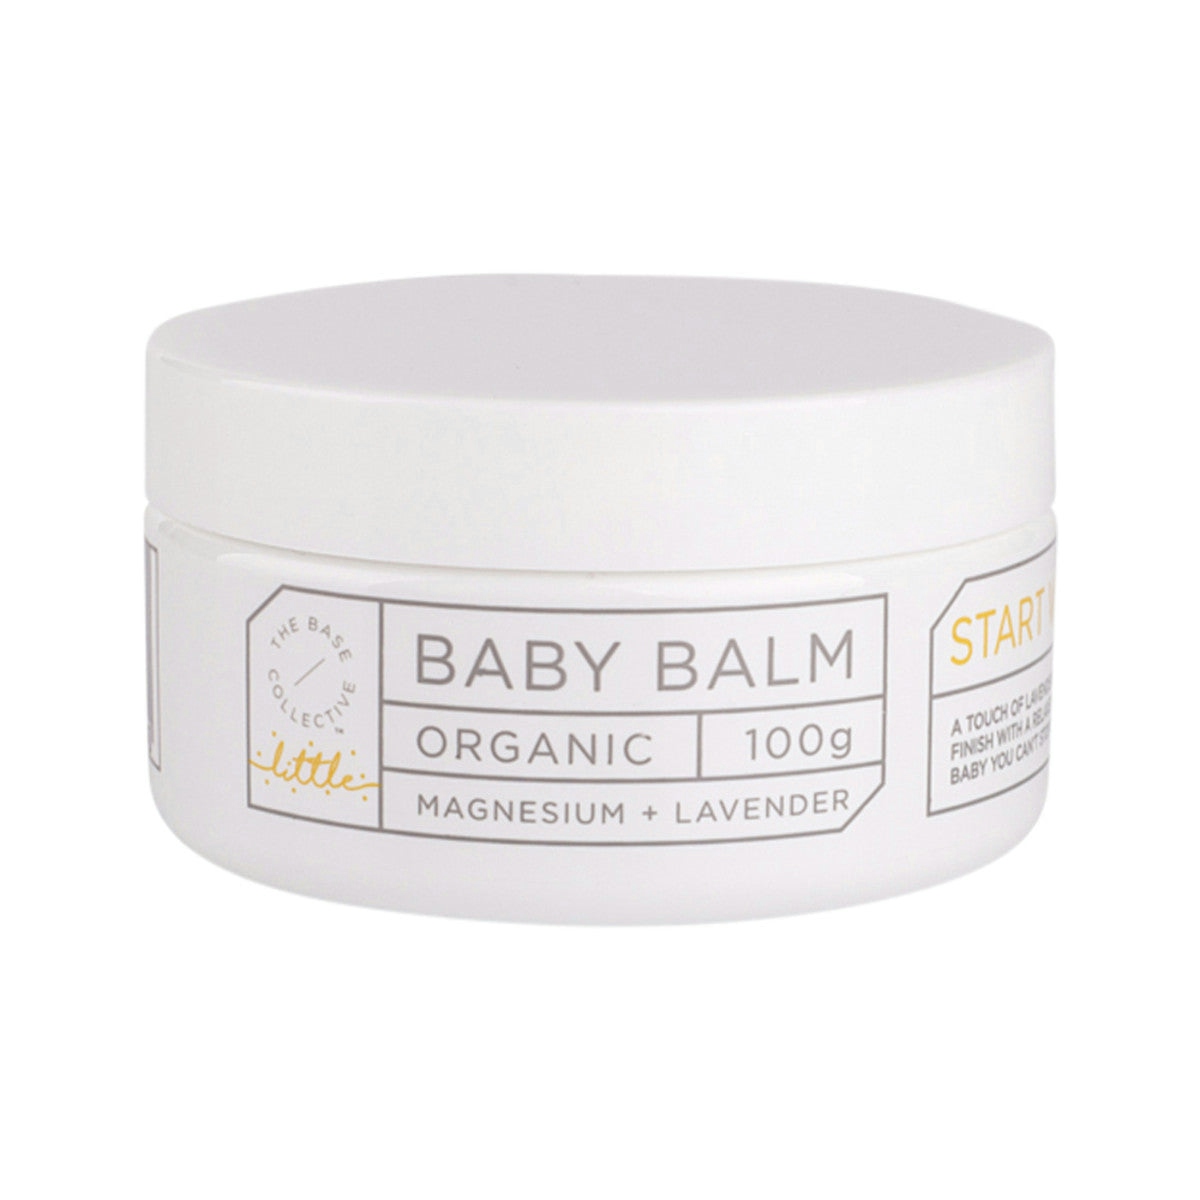 image of The Base Collective Little Organic Baby Balm Magnesium & Lavender 100g on white background 